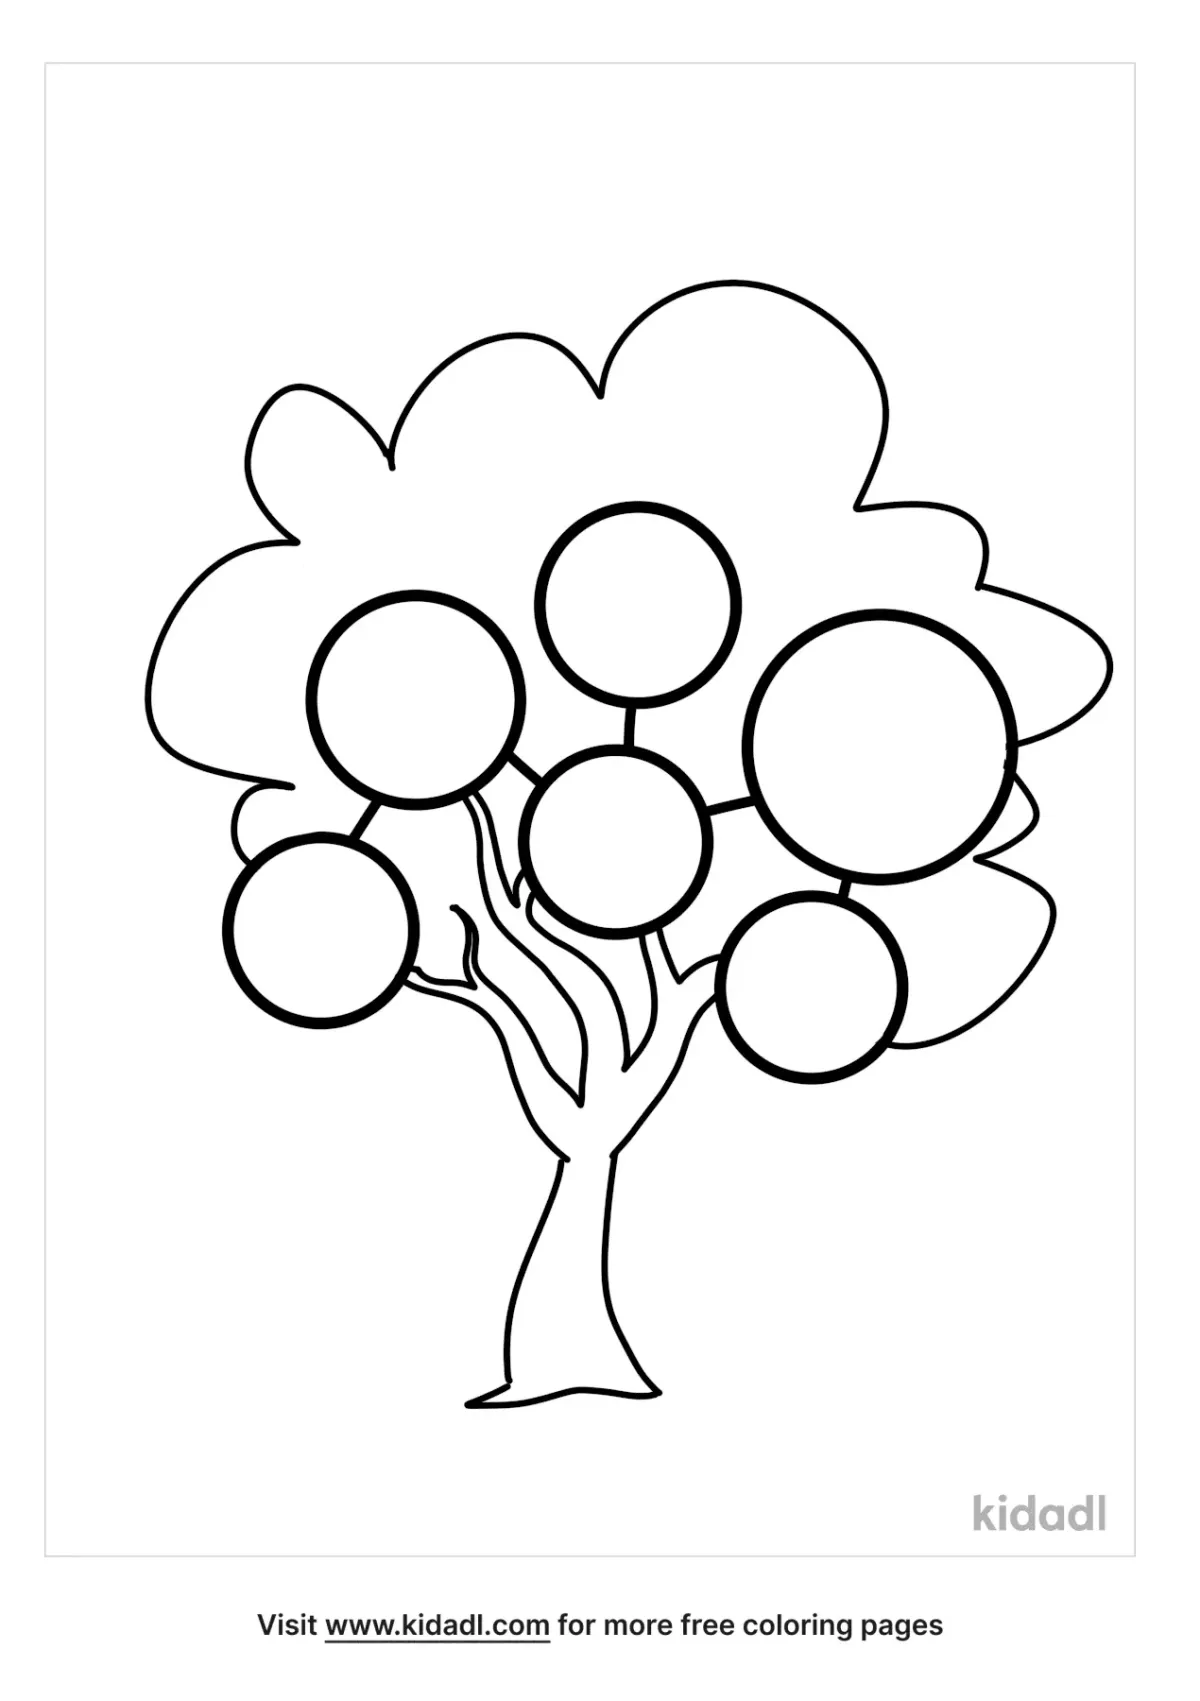 Family Tree Coloring Page